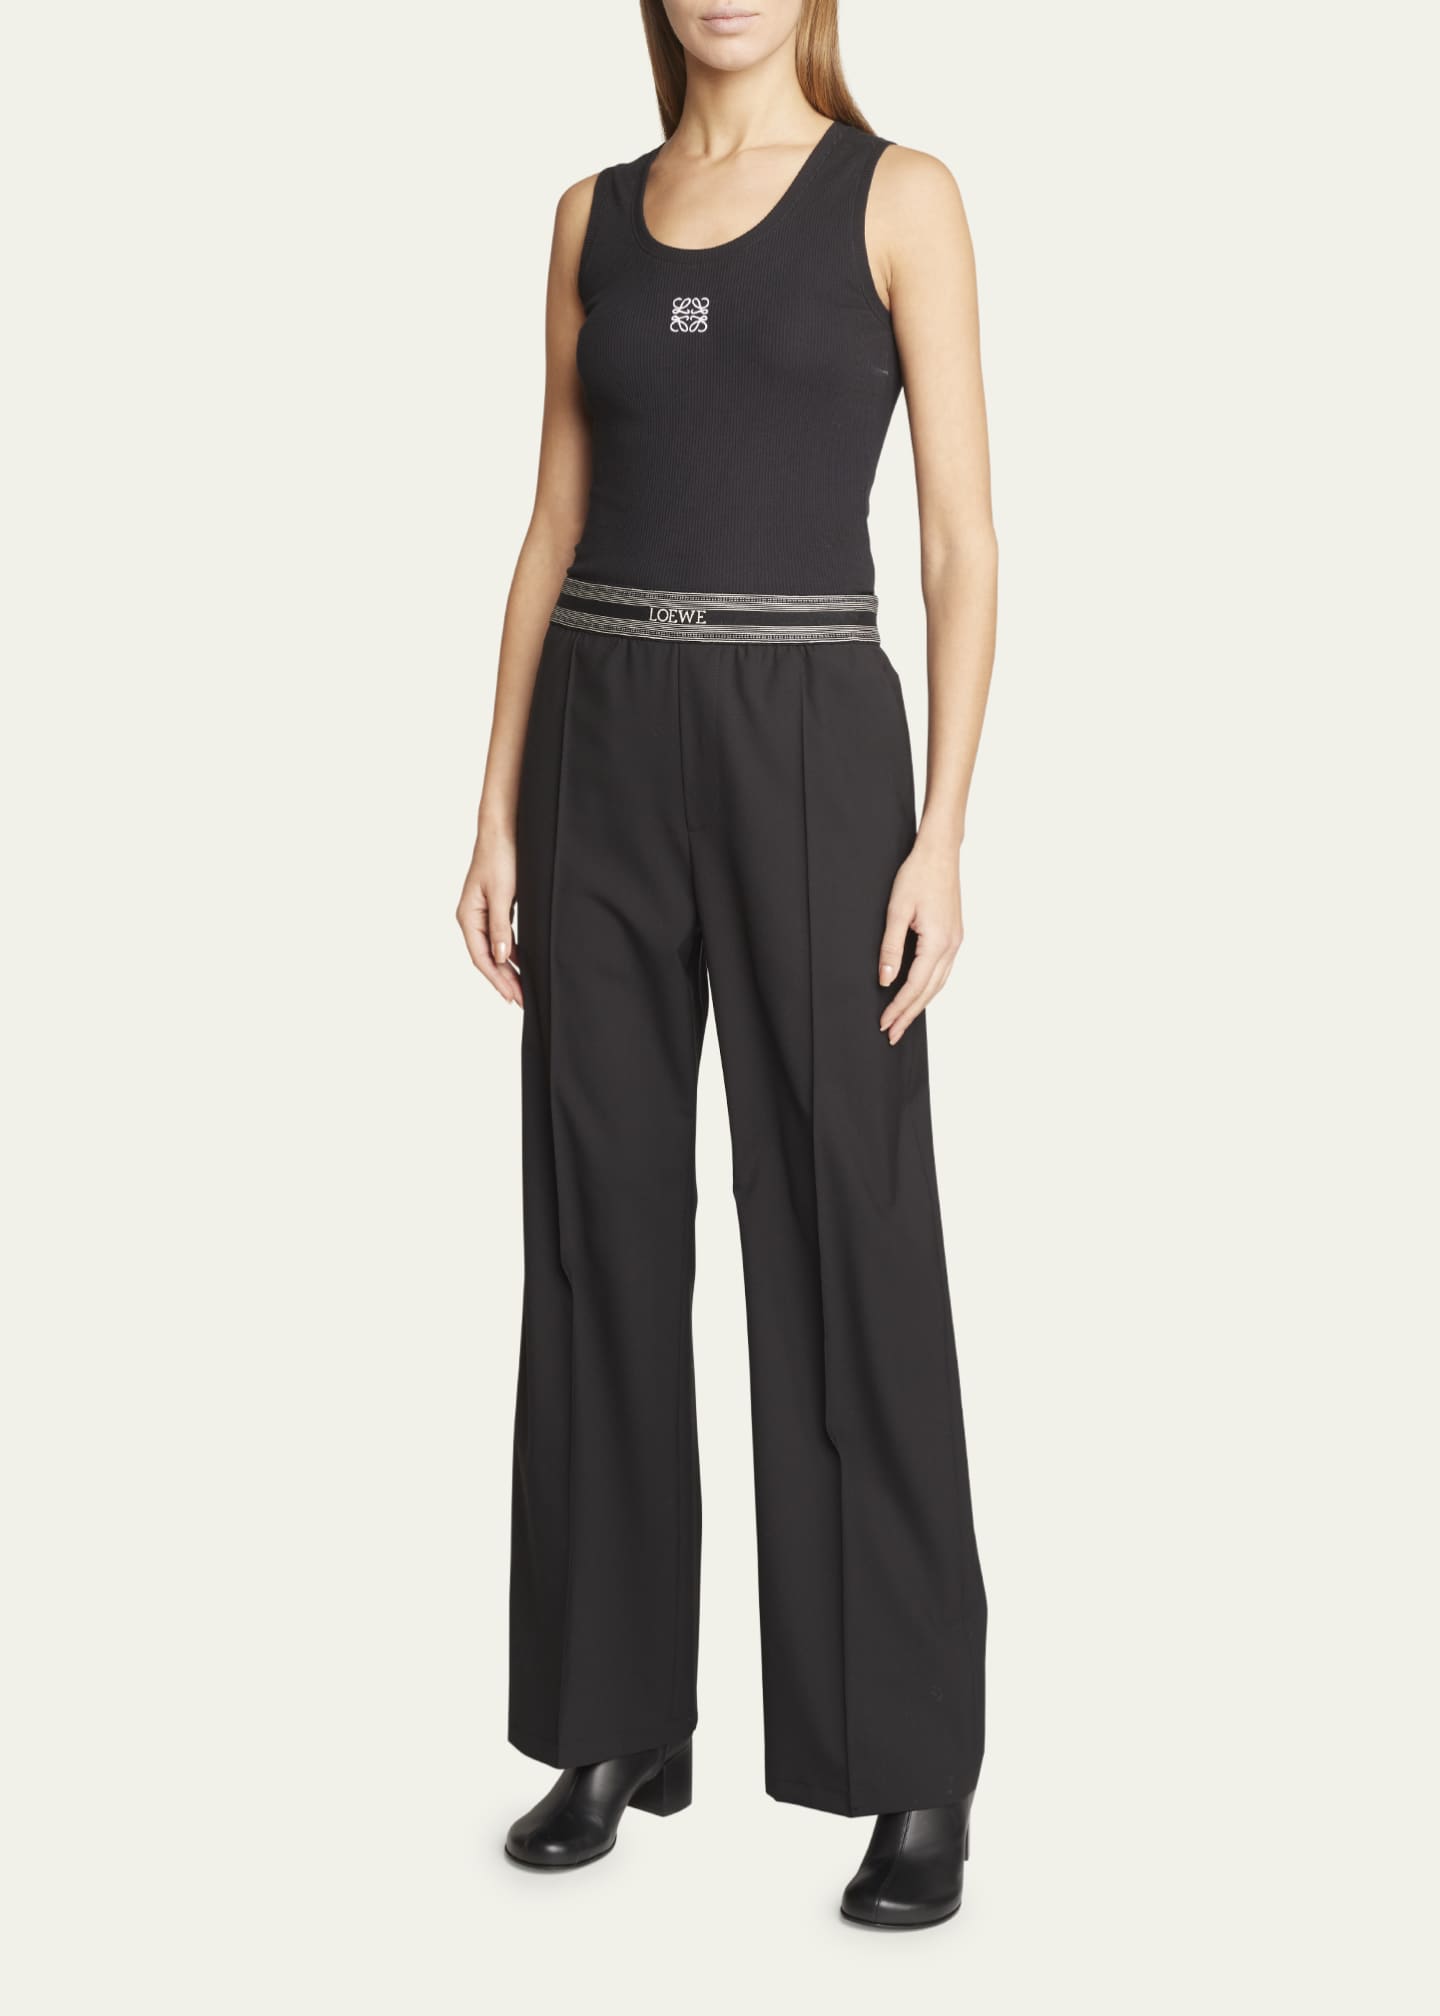 Loewe Pleated-Front Trousers with Branded Waistband - Bergdorf Goodman